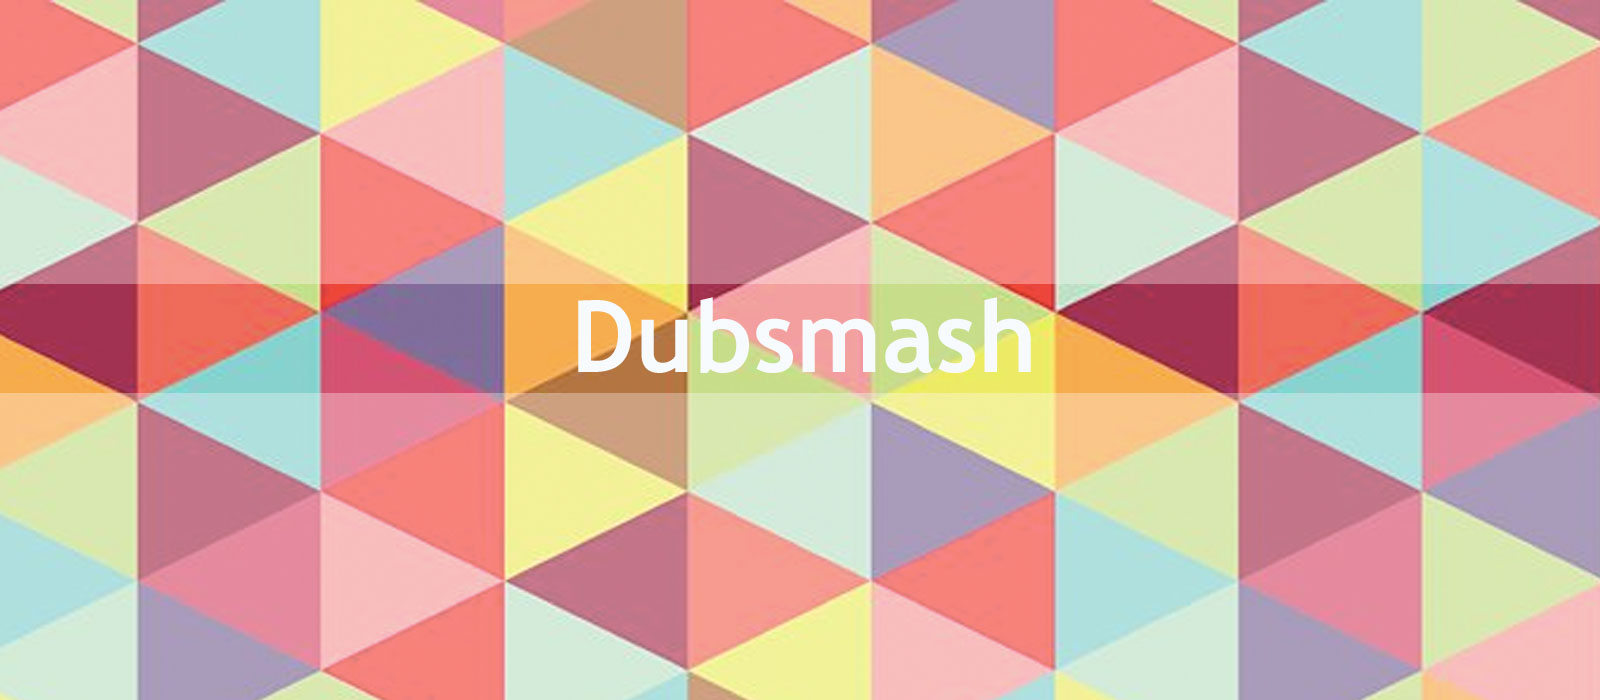 Dubsmash A Case Study In Virality